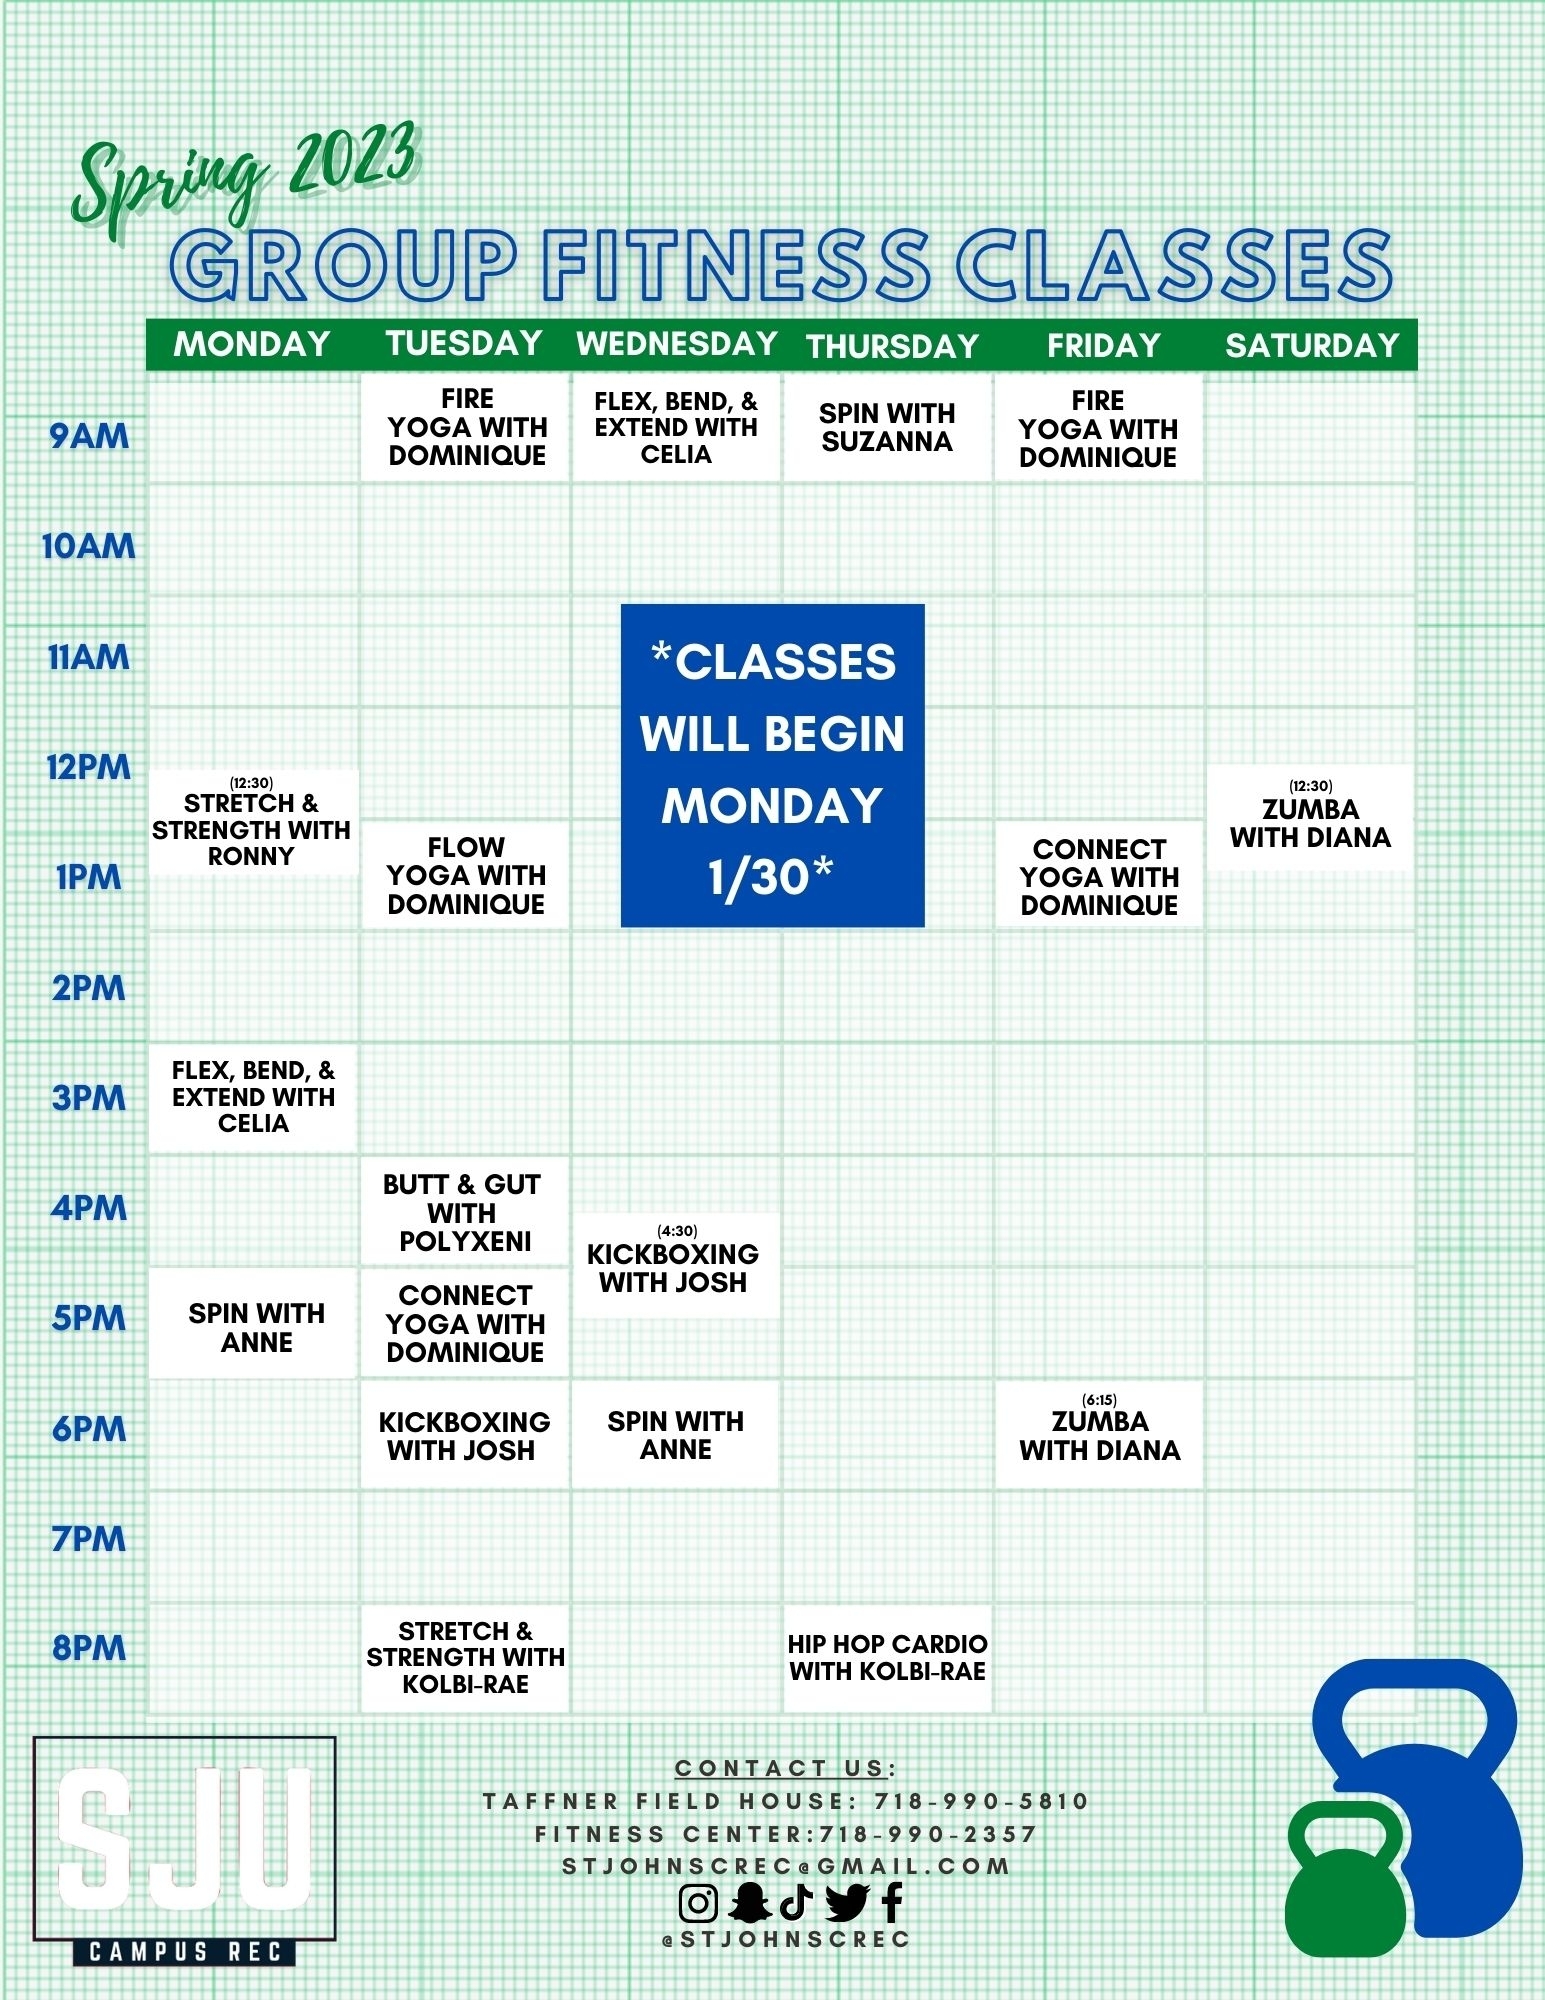 A grid showing the fitness class schedule for Spring 2023